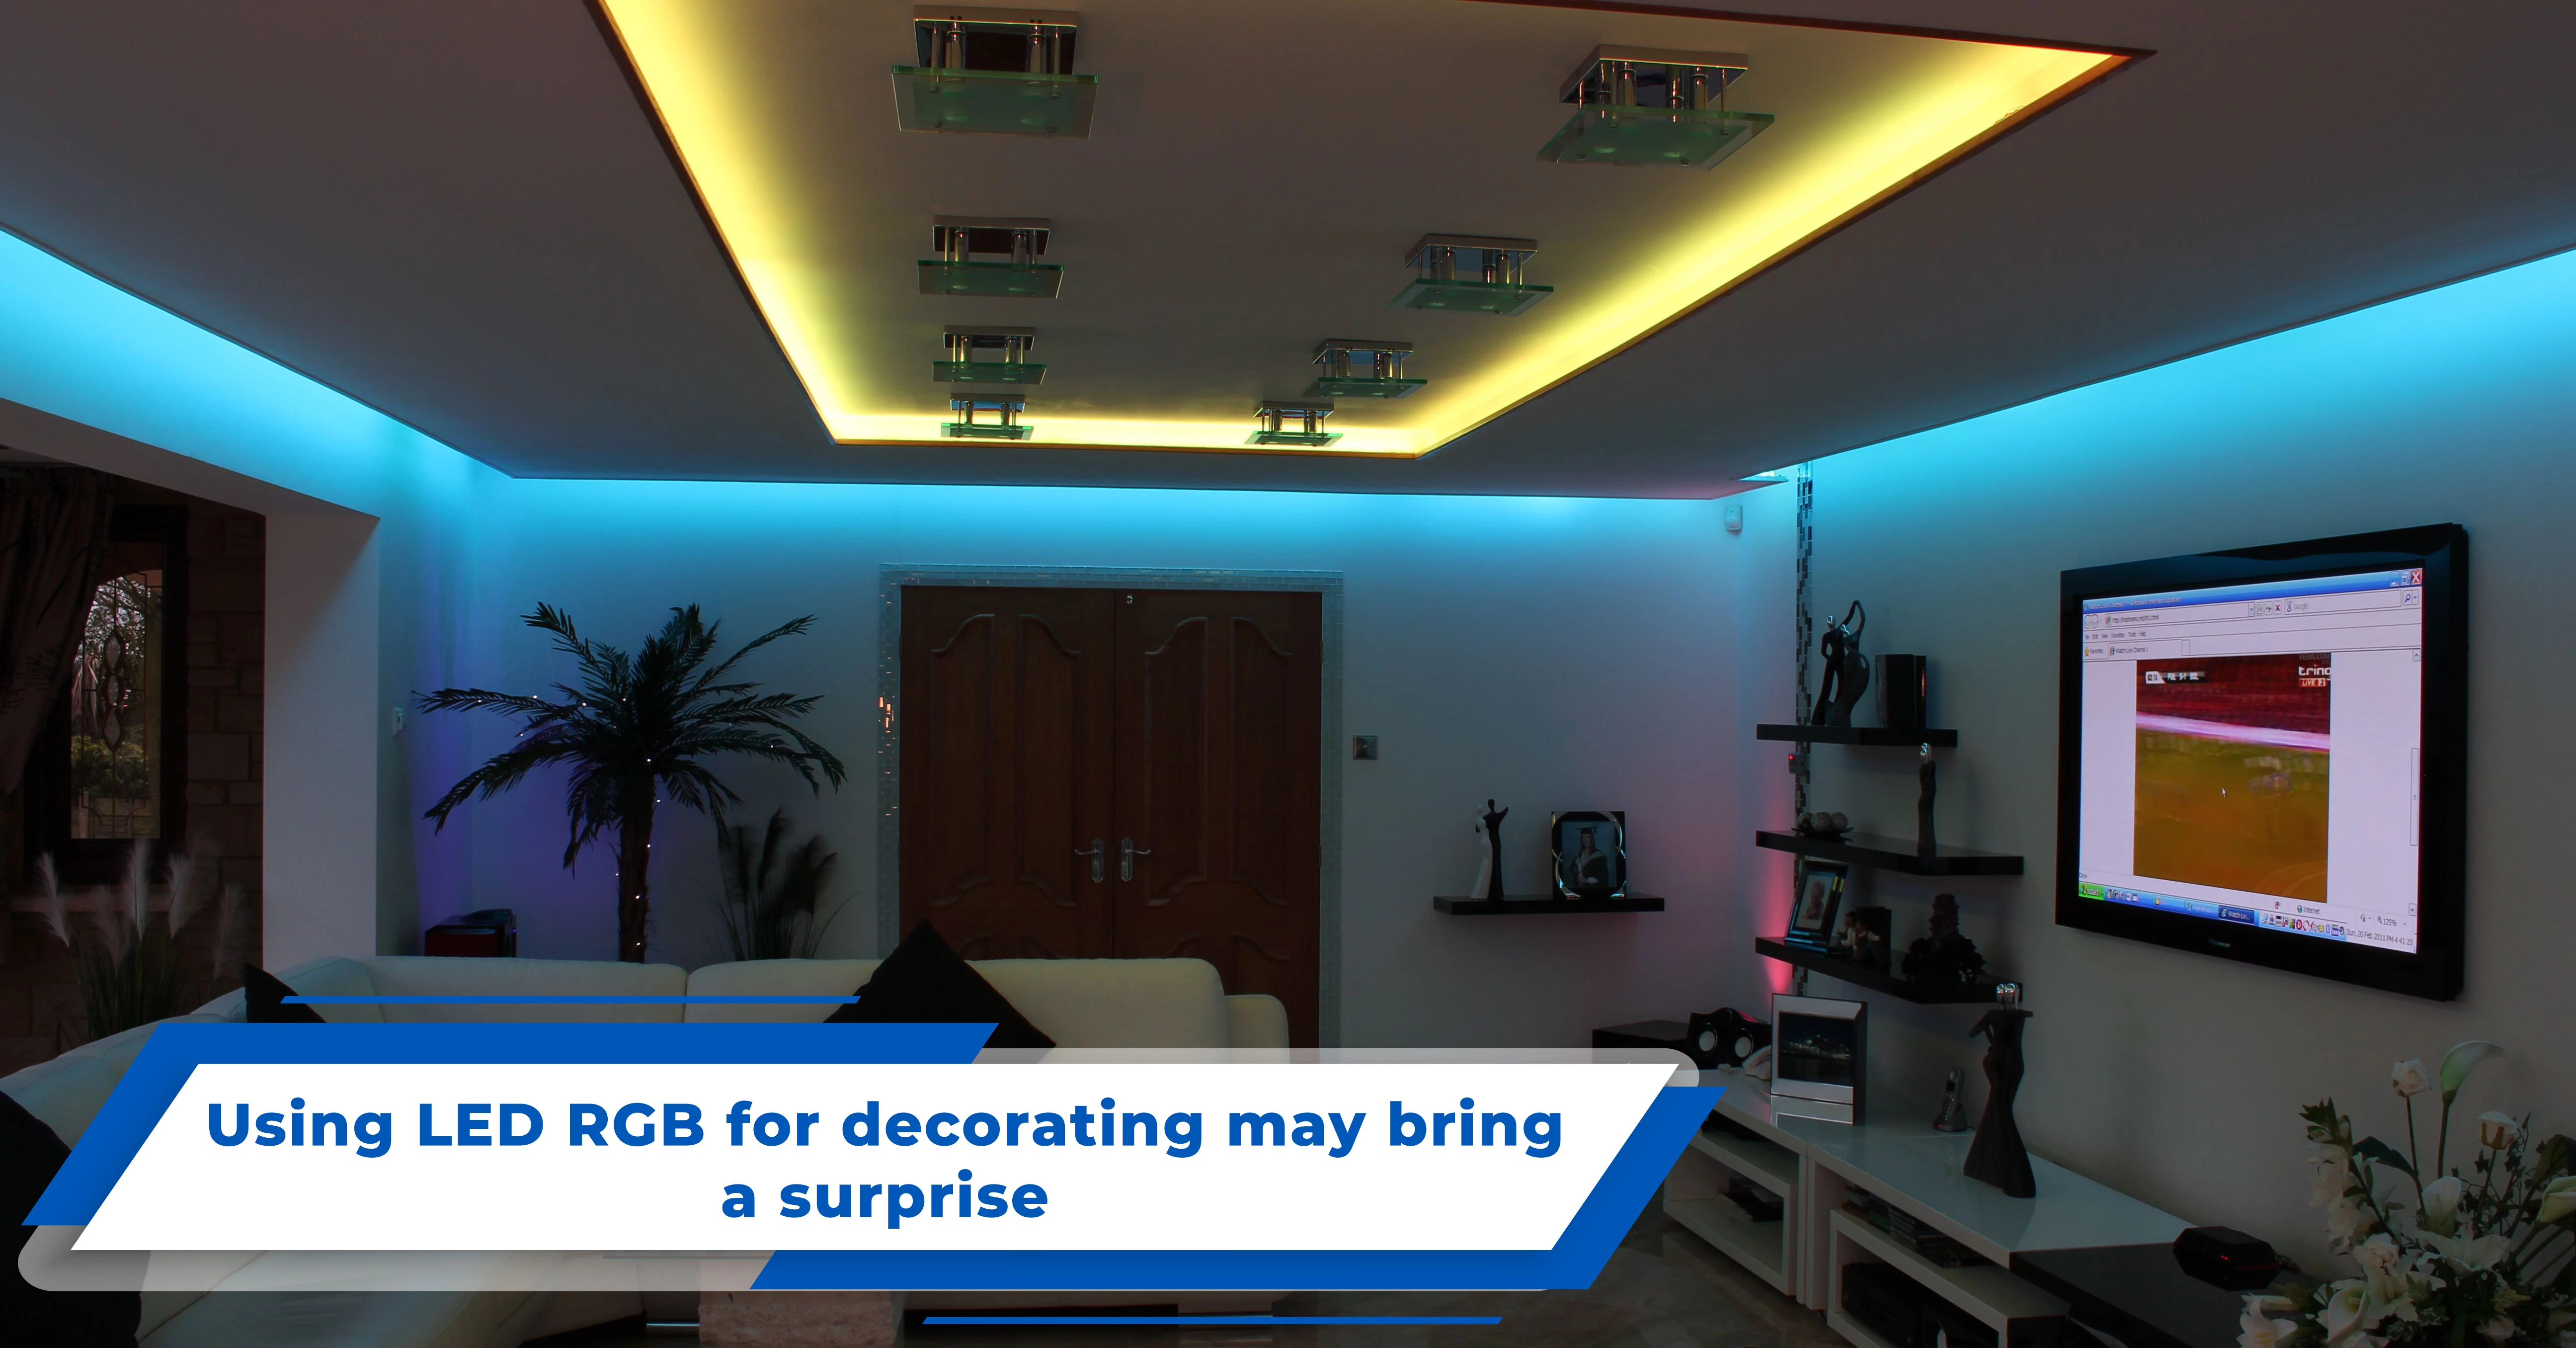 Using LED RGB for decorating may bring a surprise